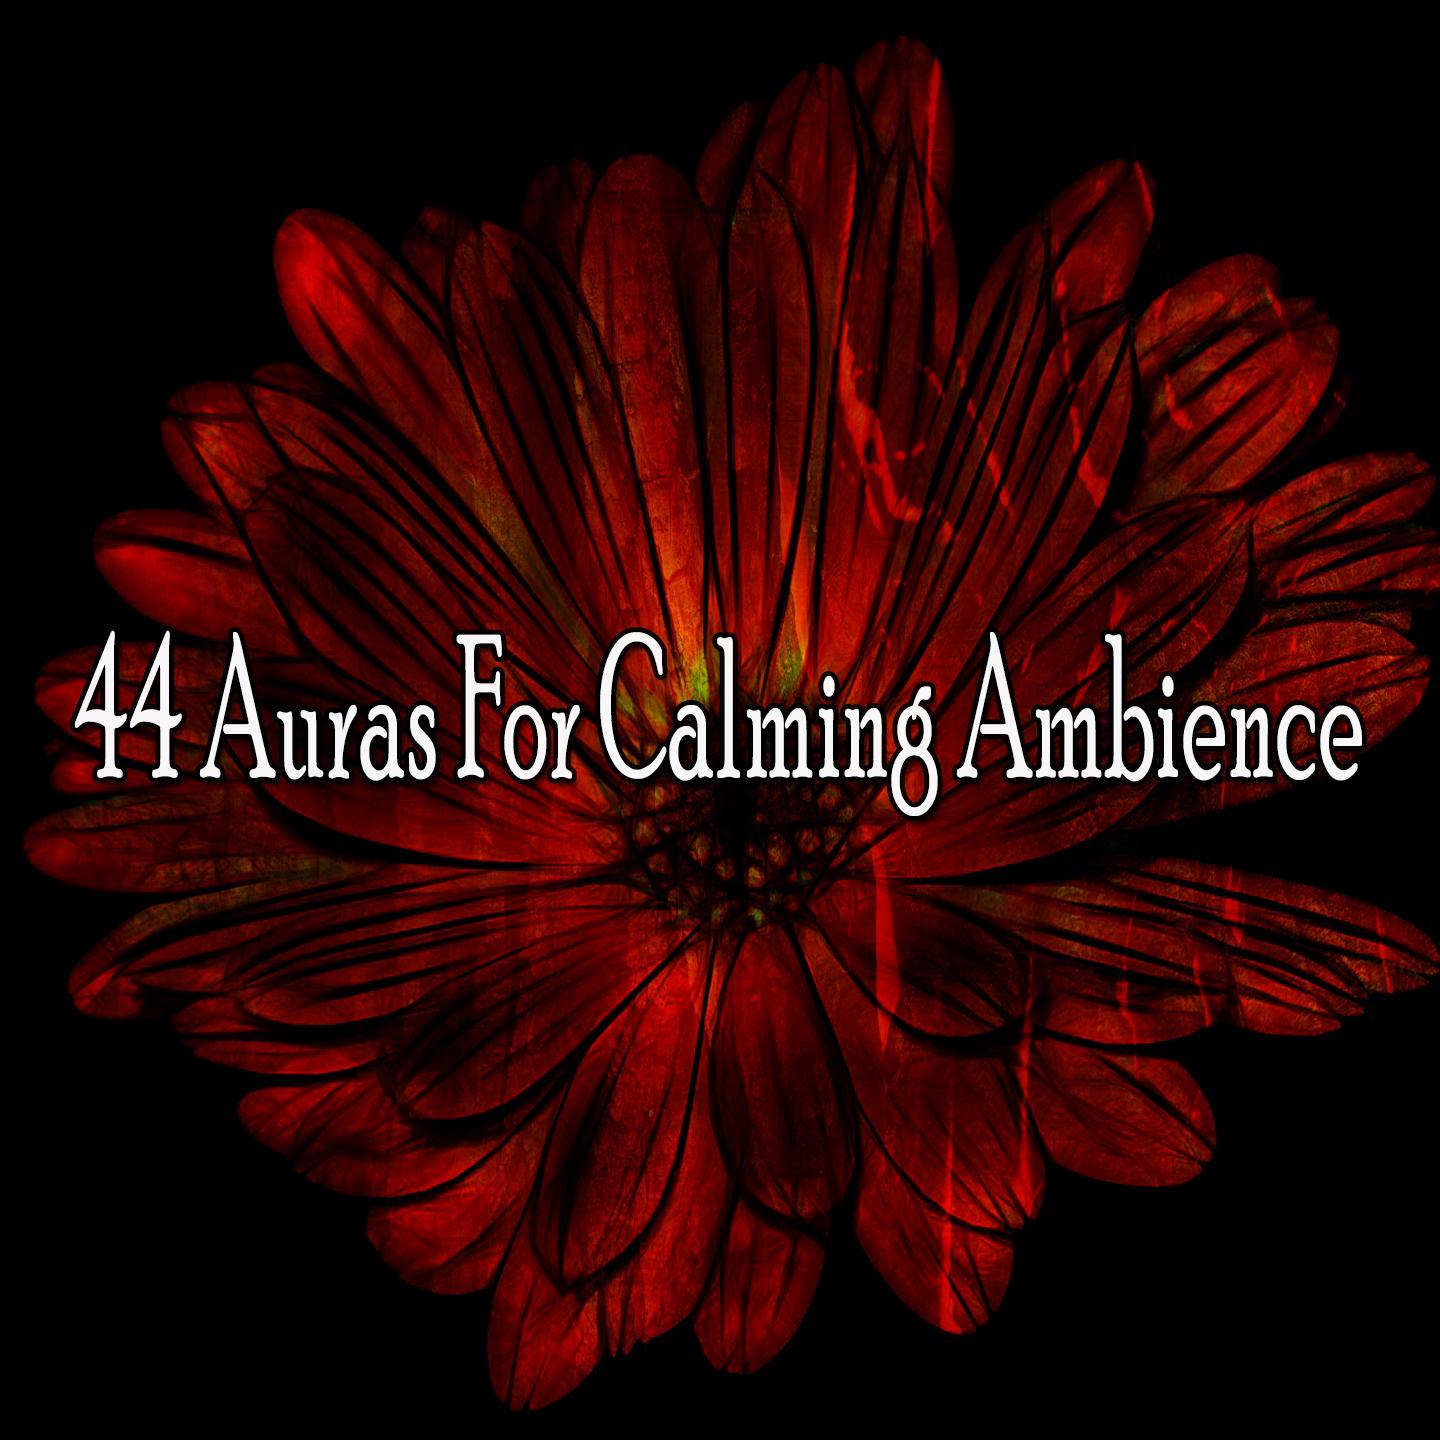 44 Auras for Calming Ambience